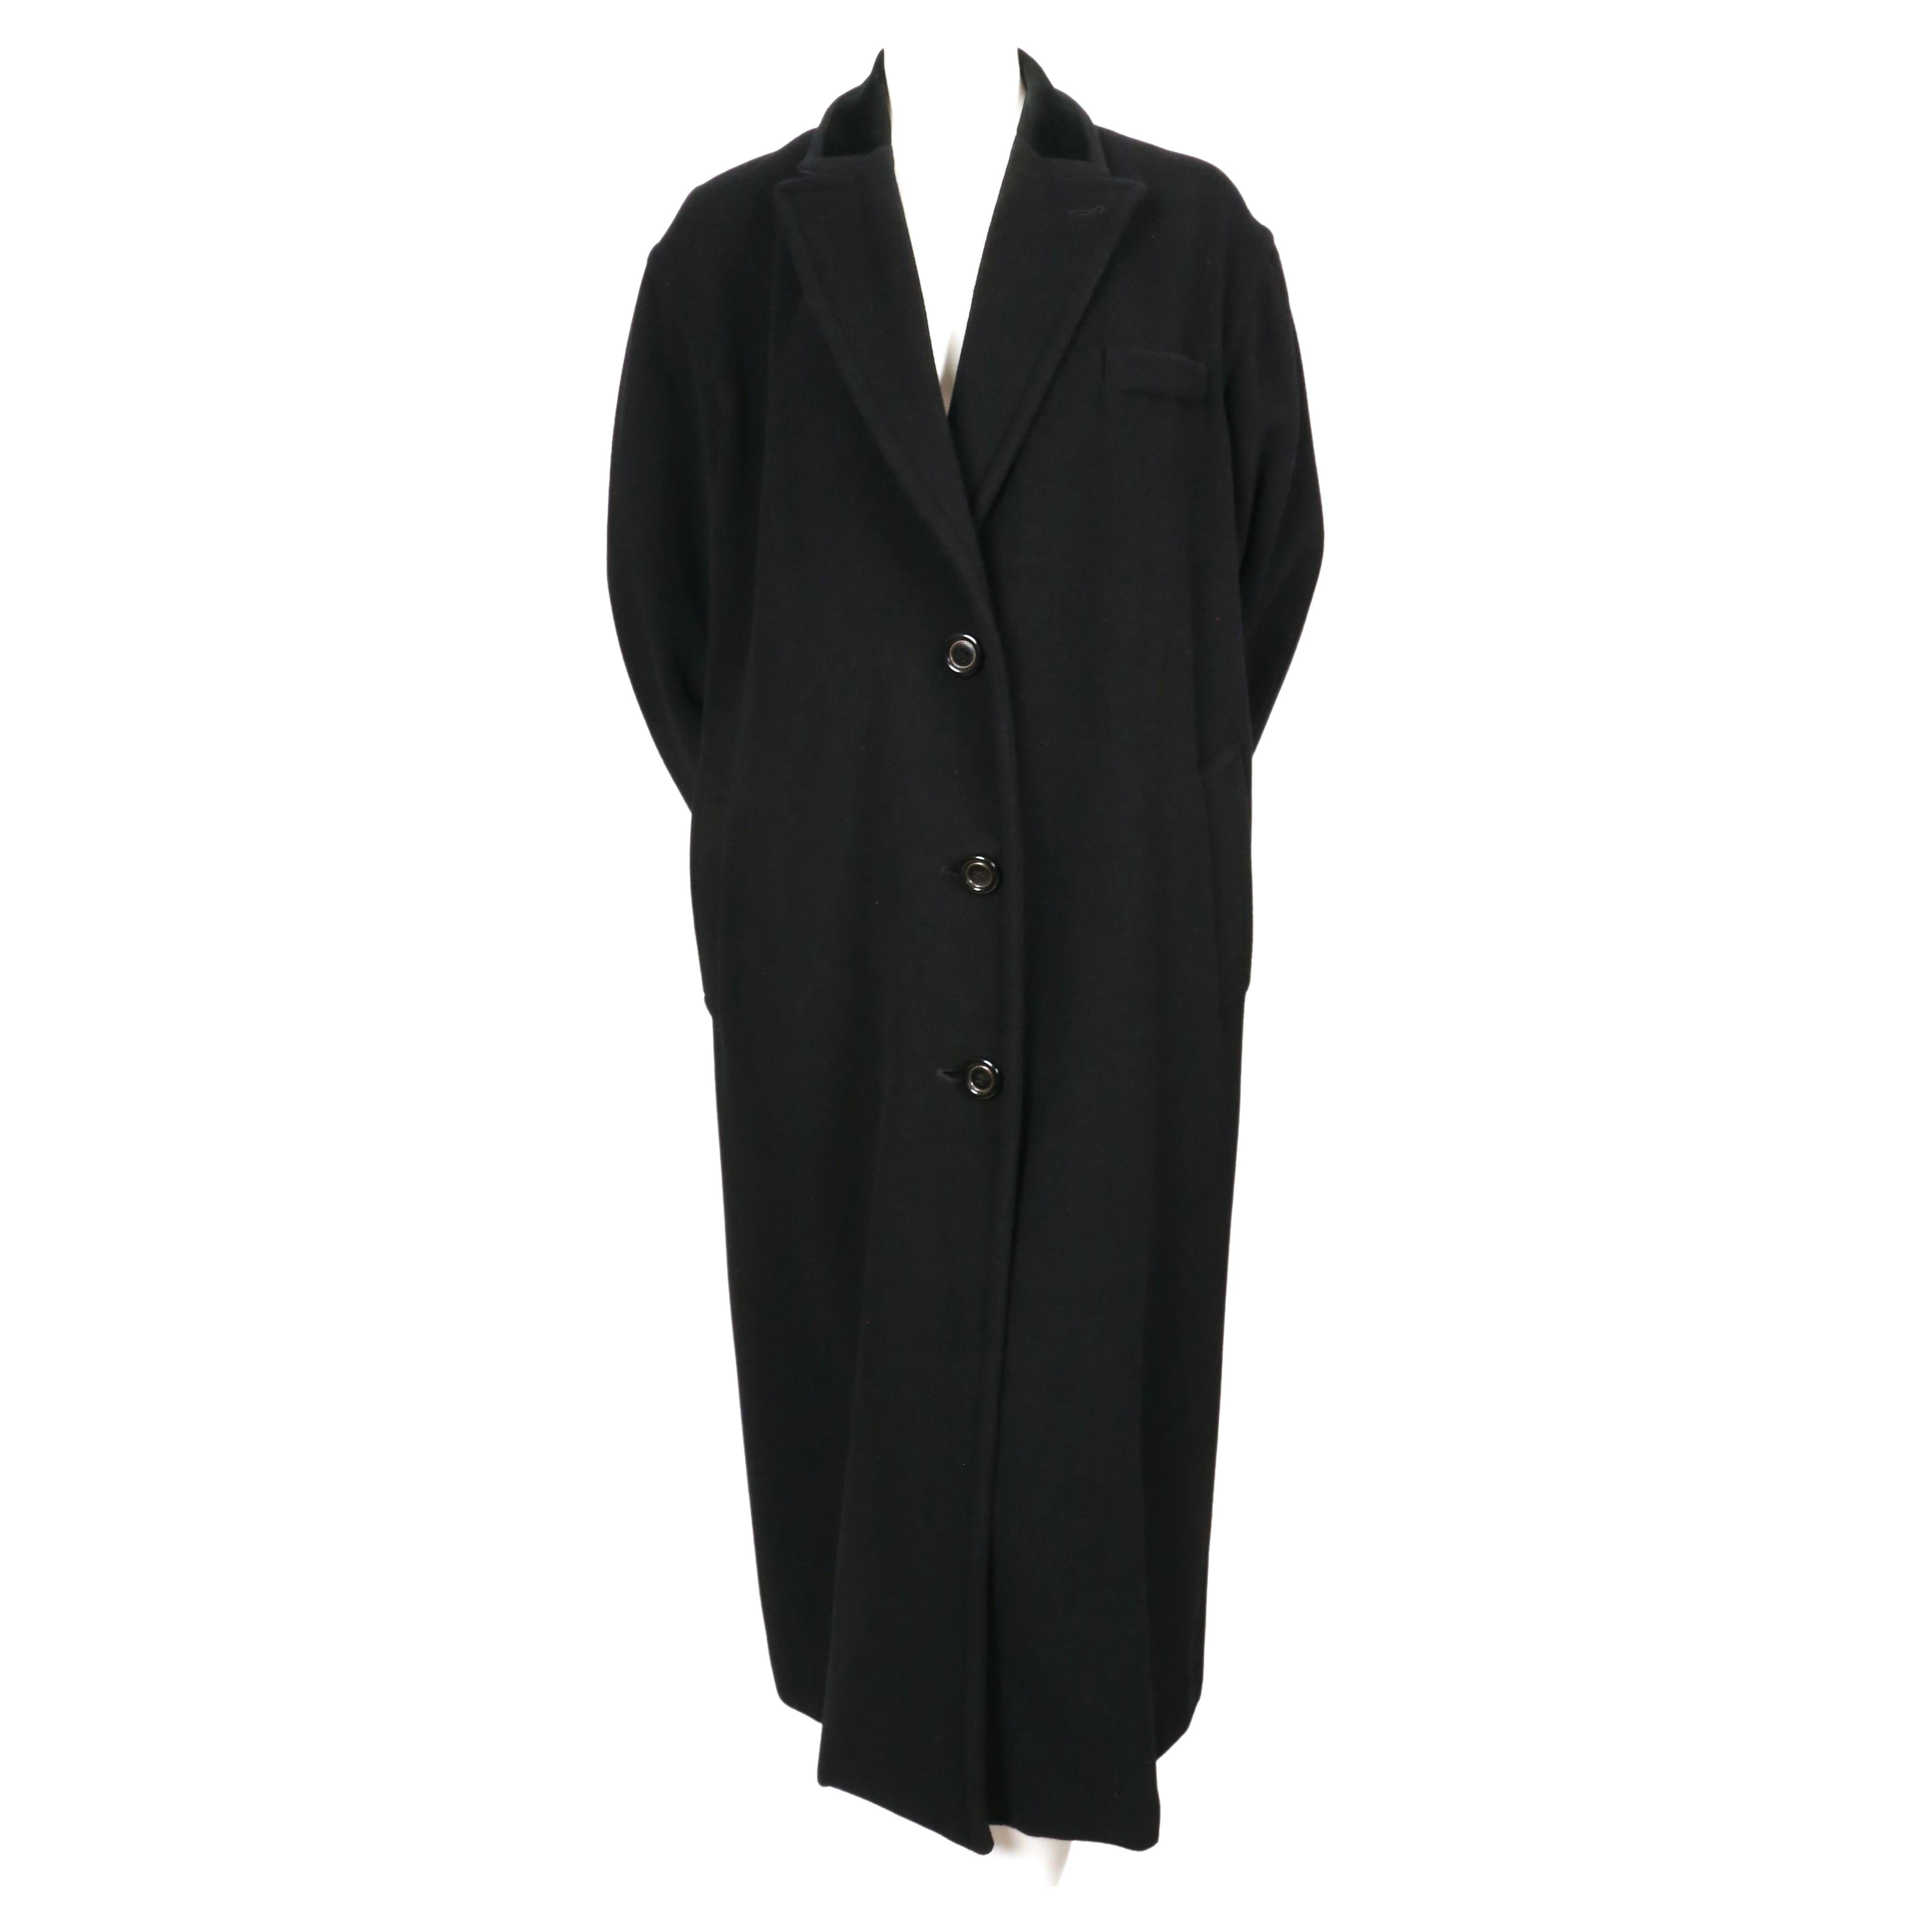 Oversized, black mohair and wool coat with velvet trim designed by Jean Paul Gaultier dating to fall of 1998. Labeled a French 36 however it has a very oversized fit so it will fit a 2-8 depending on desired fit. Coat was not clipped on the size 2